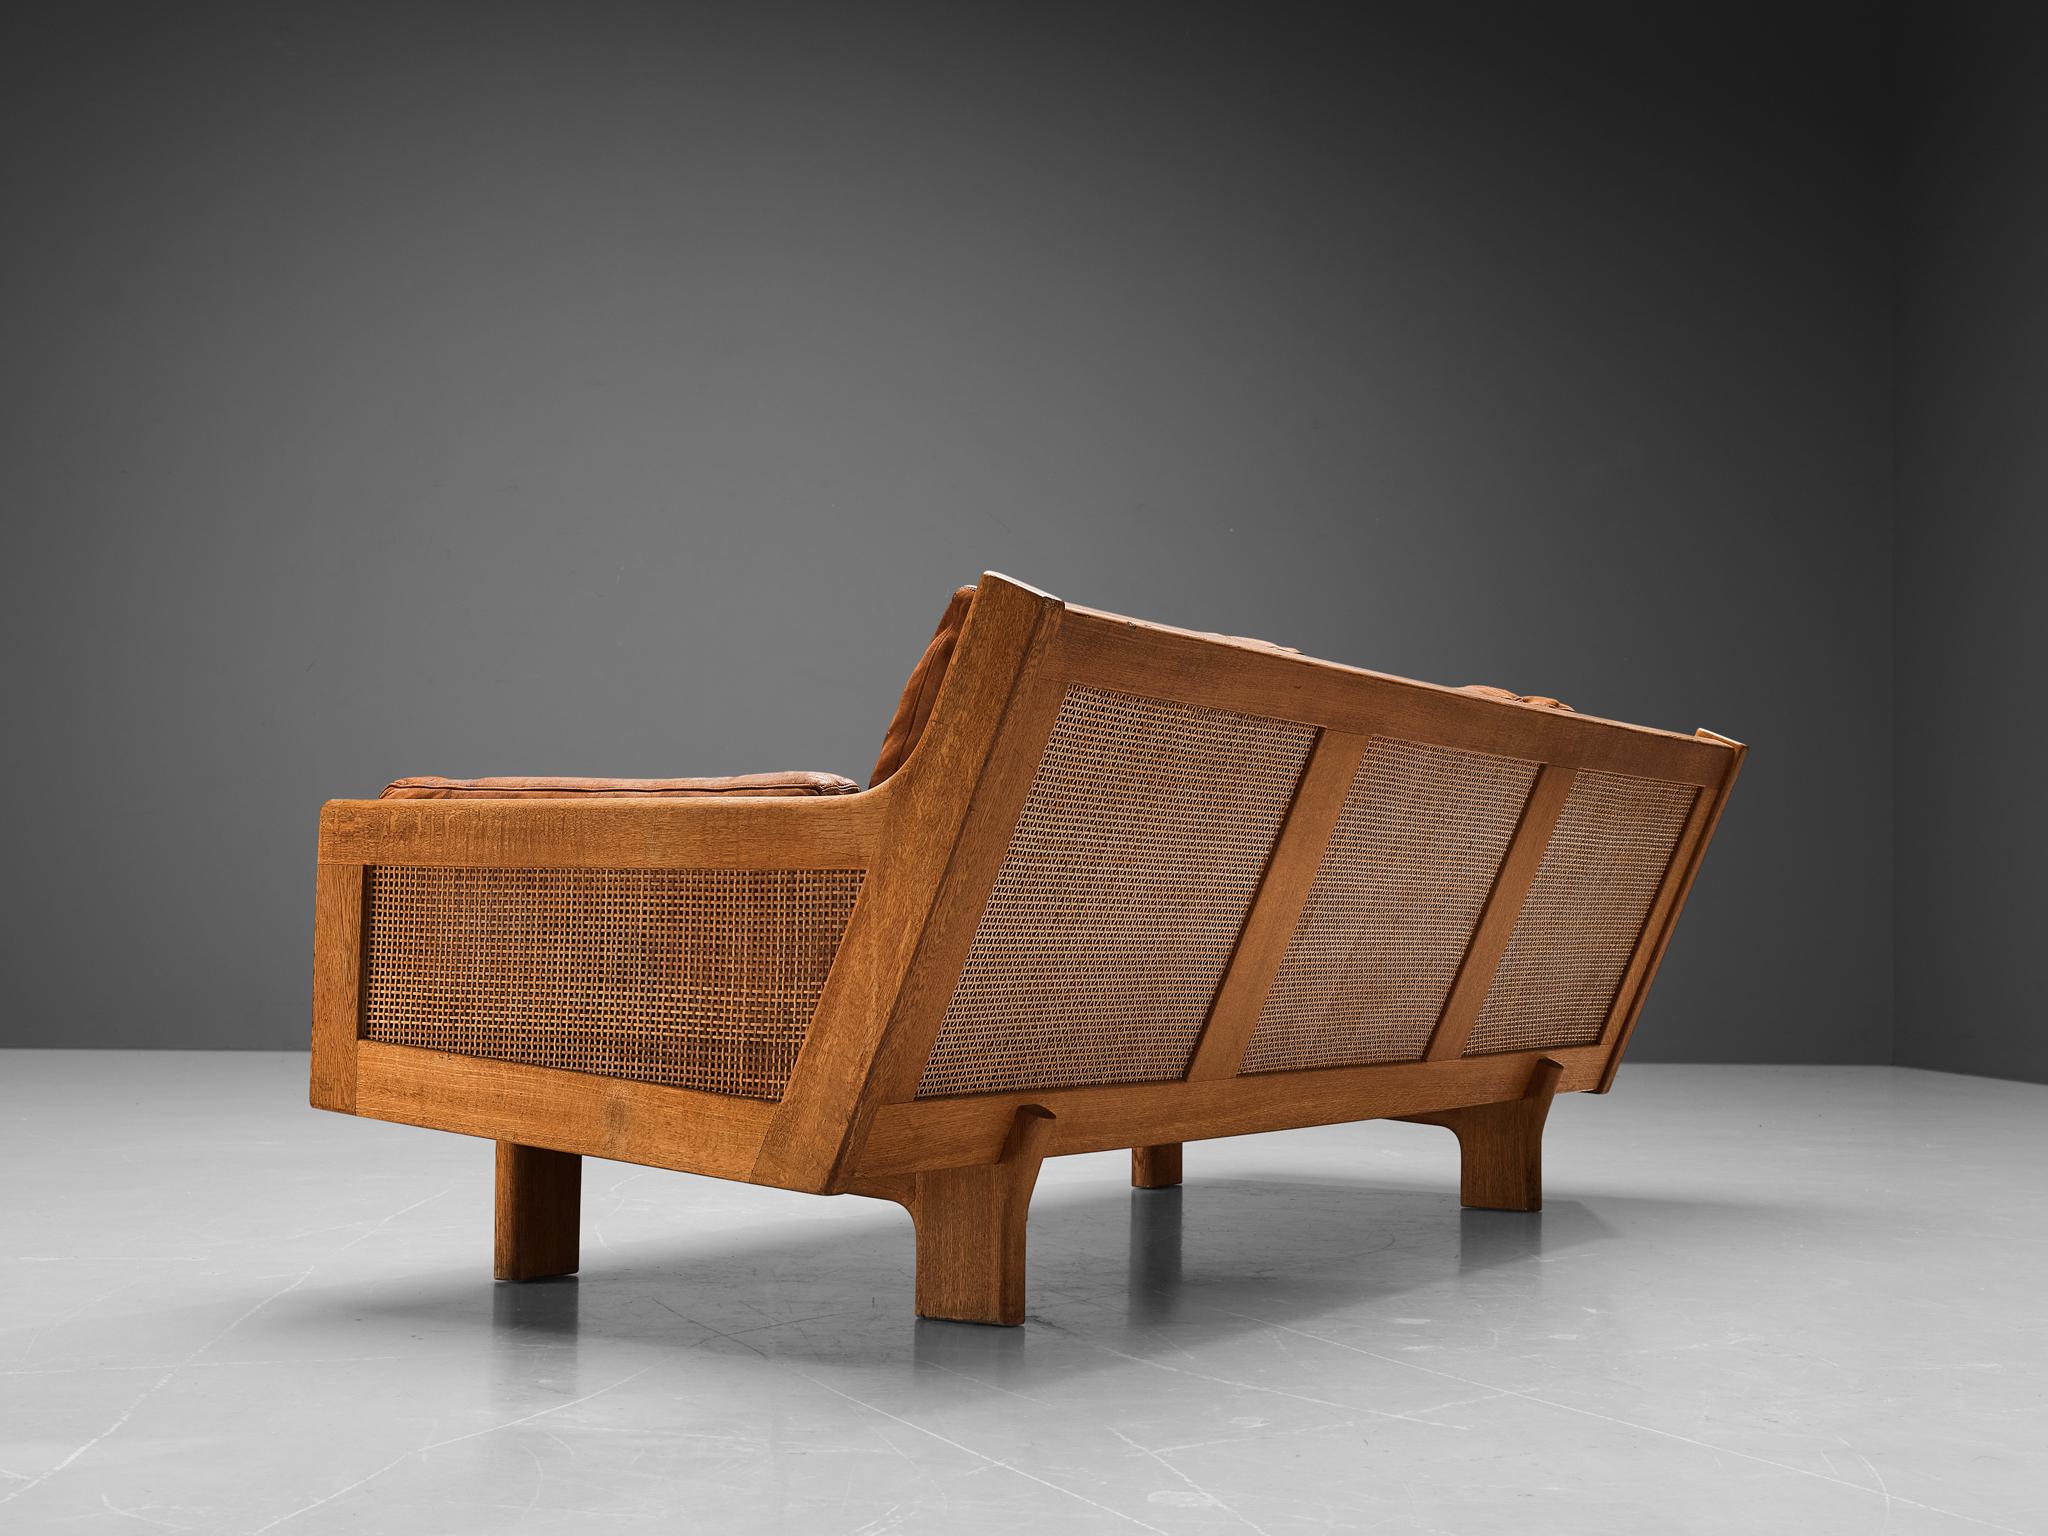 Three-seat sofa, oak, cane, leather, Denmark, 1960s 

This eccentric sofa features a splendid construction. When experienced from the side, the frame embodies a sharp angle that truly underlines the essence of the design. Both sides are executed in